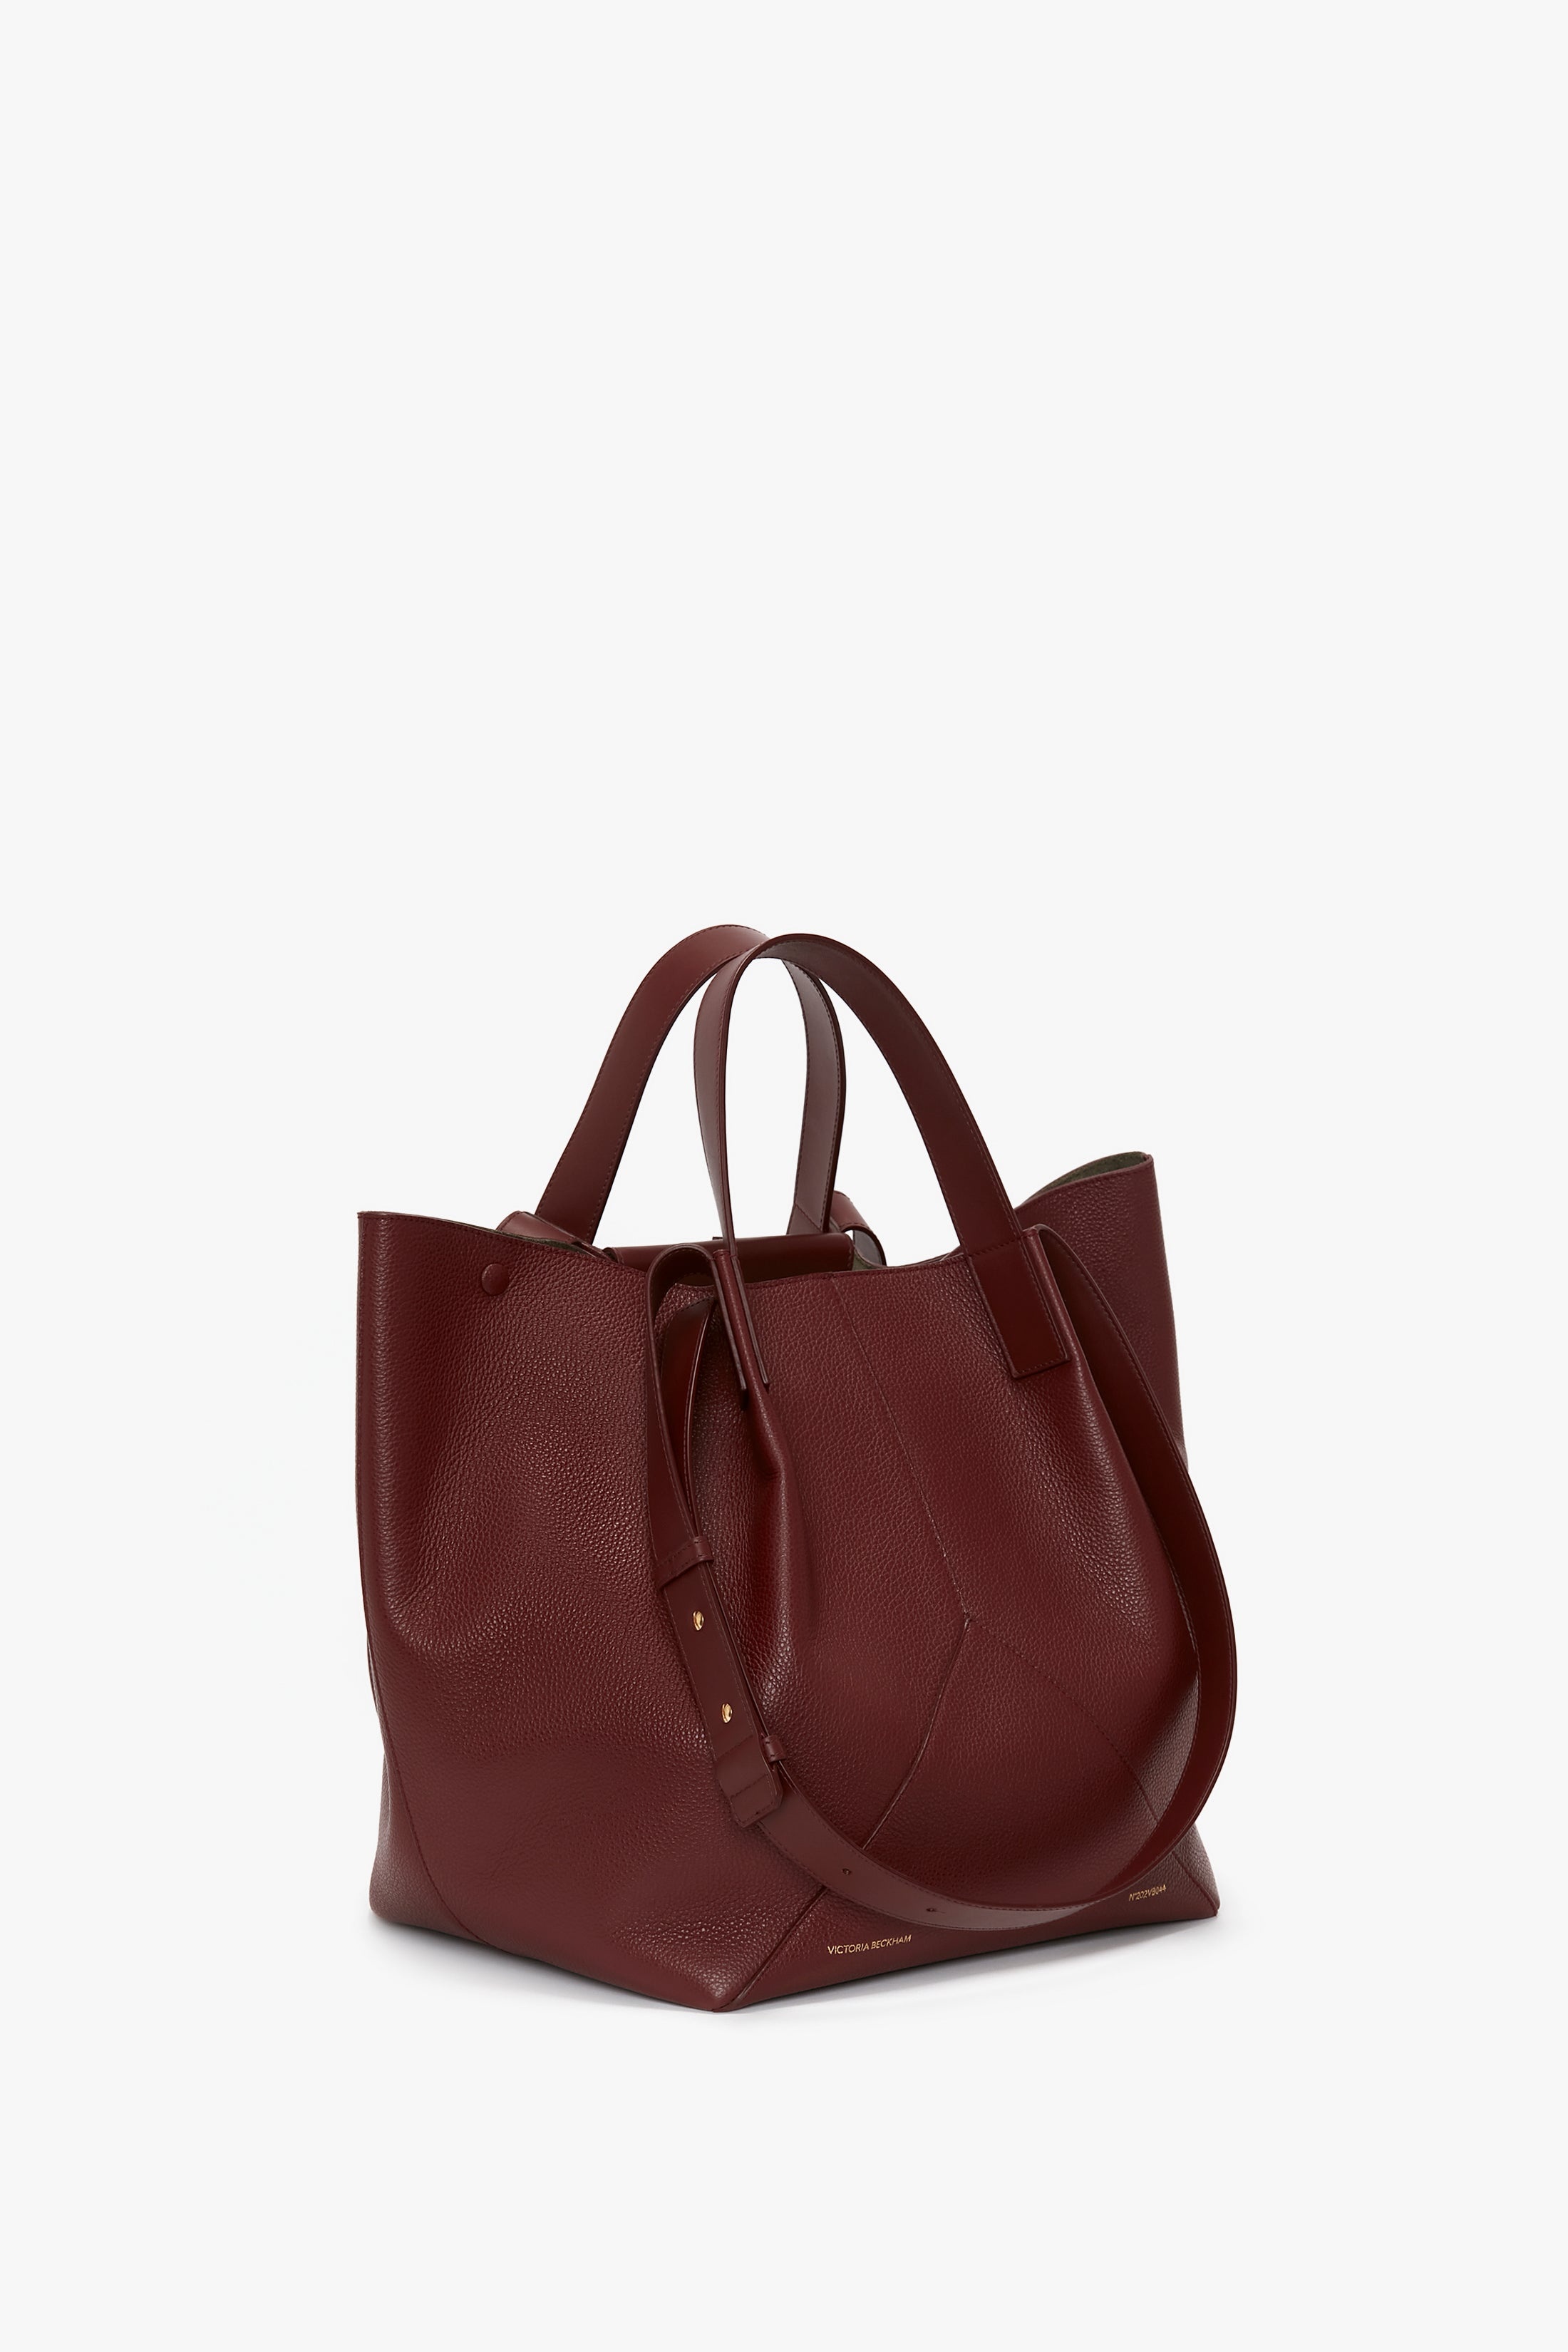 The Medium Tote In Burgundy Leather - 3